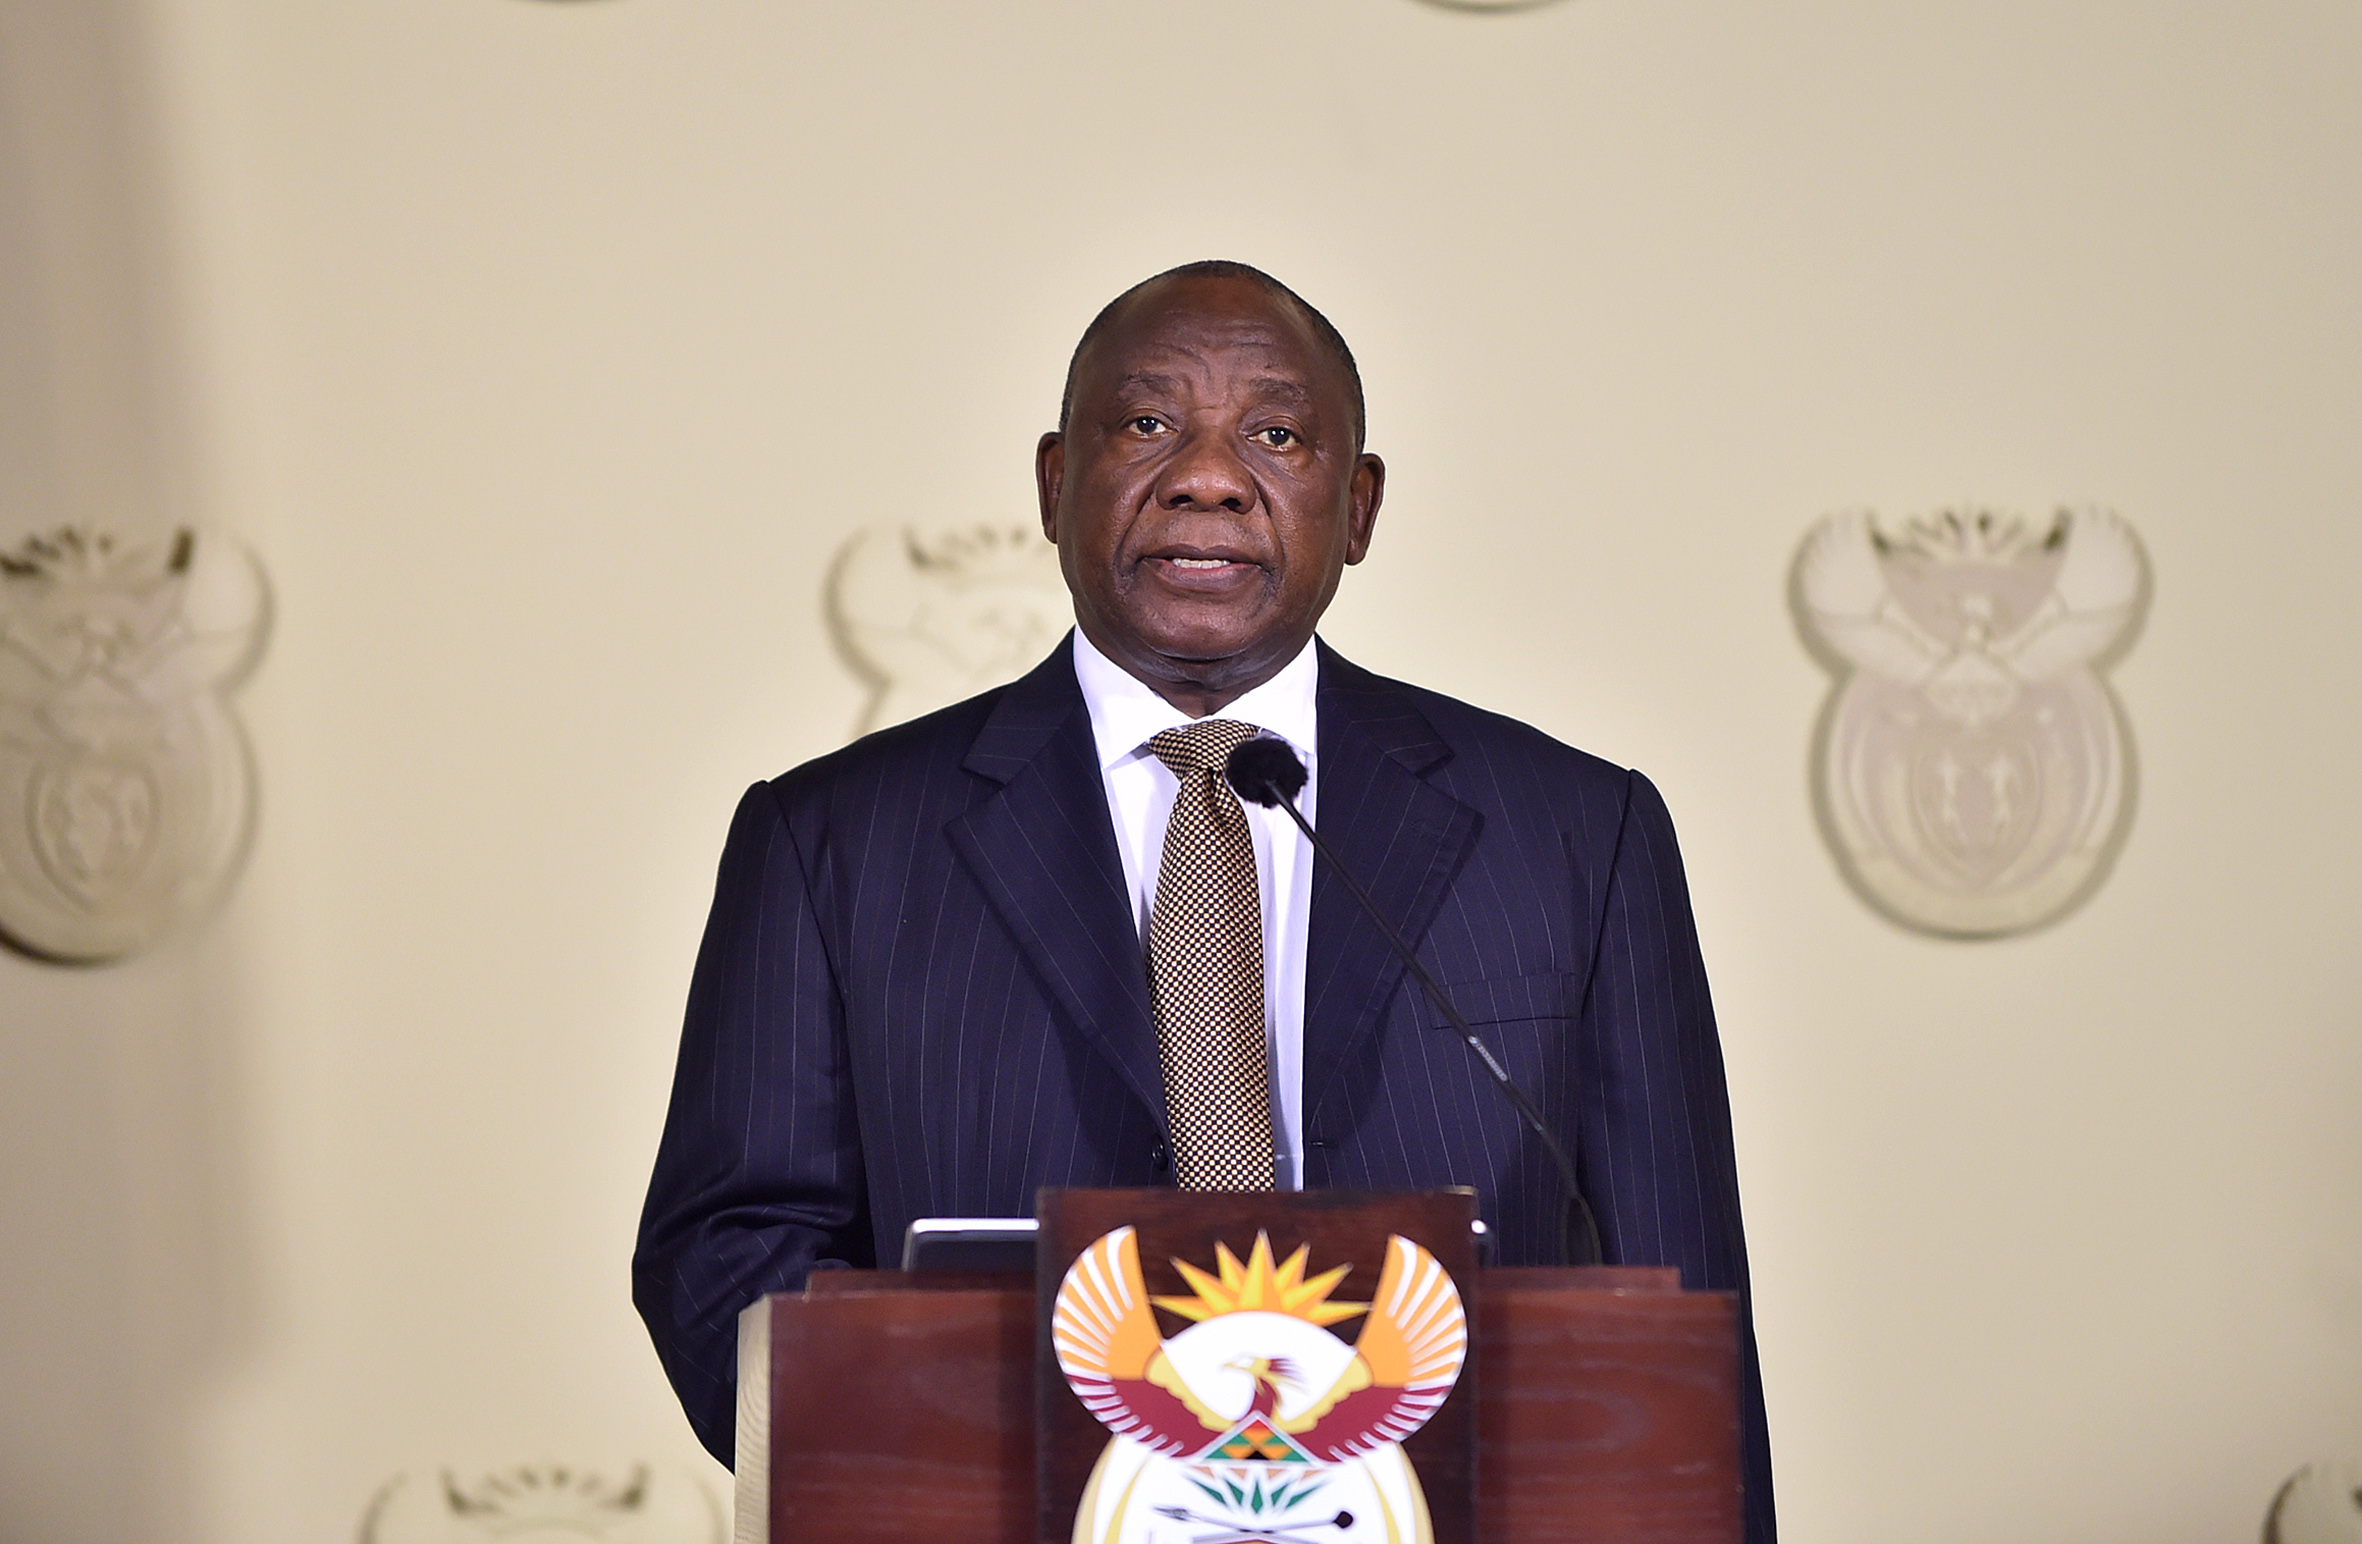 President Cyril Ramaphosa will bestow to deserving recipients the Order of Ikhamanga.